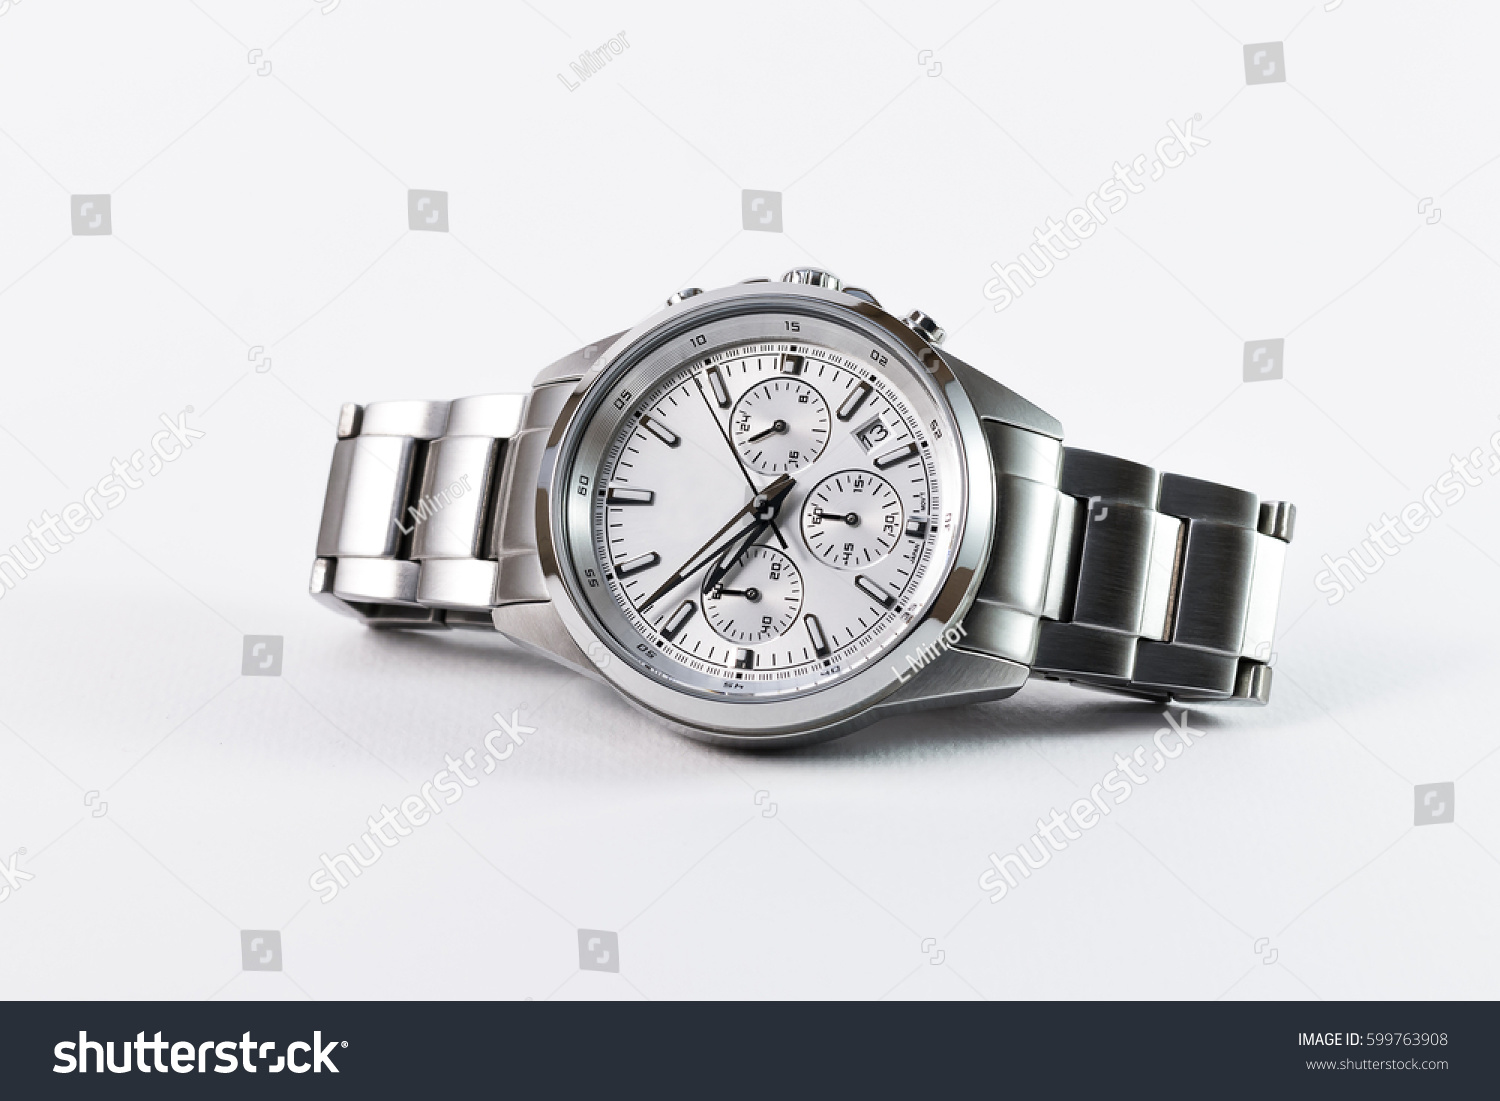 luxury watch isolated on a white background #599763908